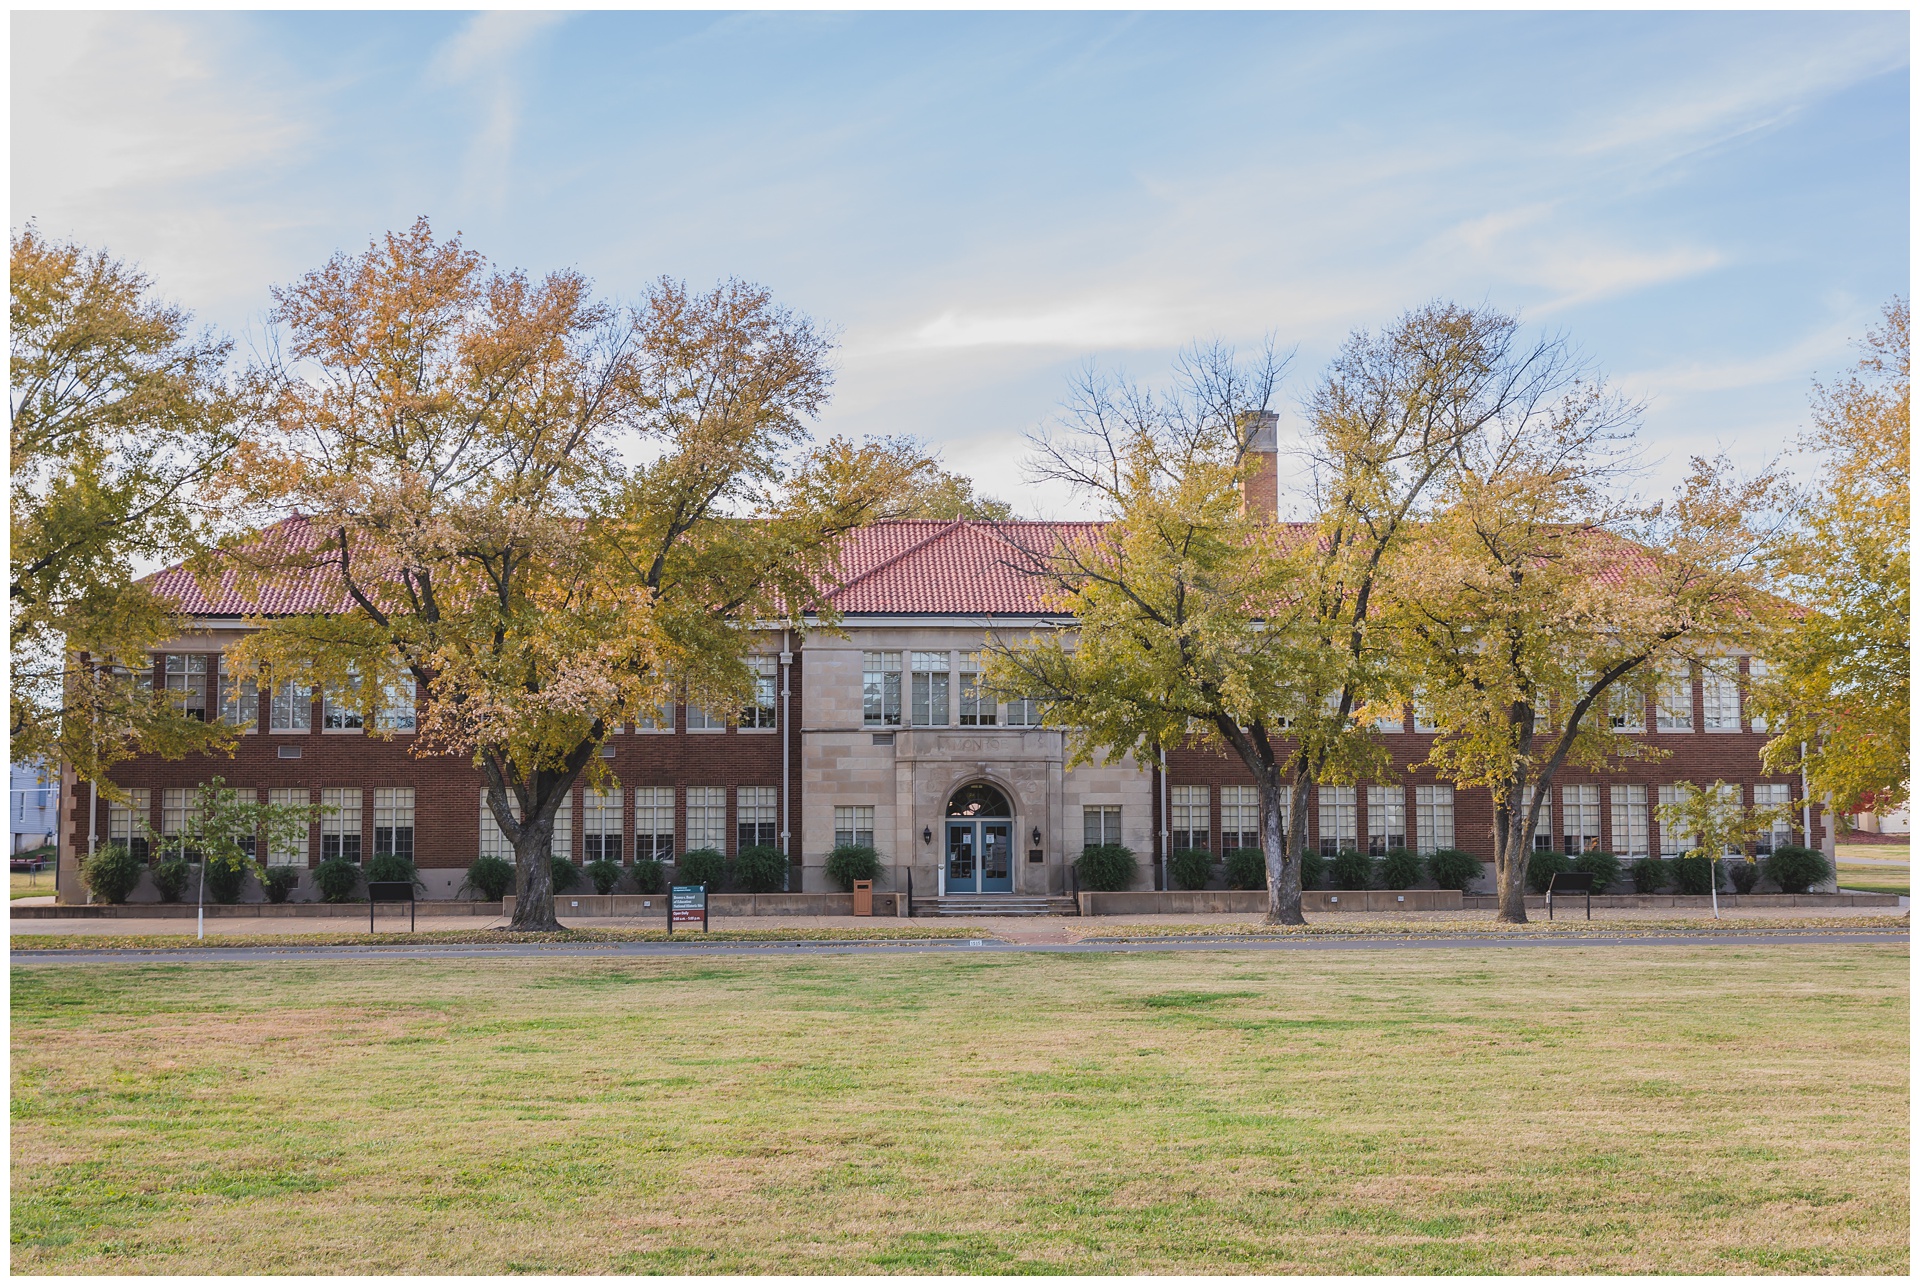 Photography at the Brown vs. Board of Education National Historic Site in Topeka, Kansas, by Kansas City wedding photographers Wisdom-Watson Weddings.